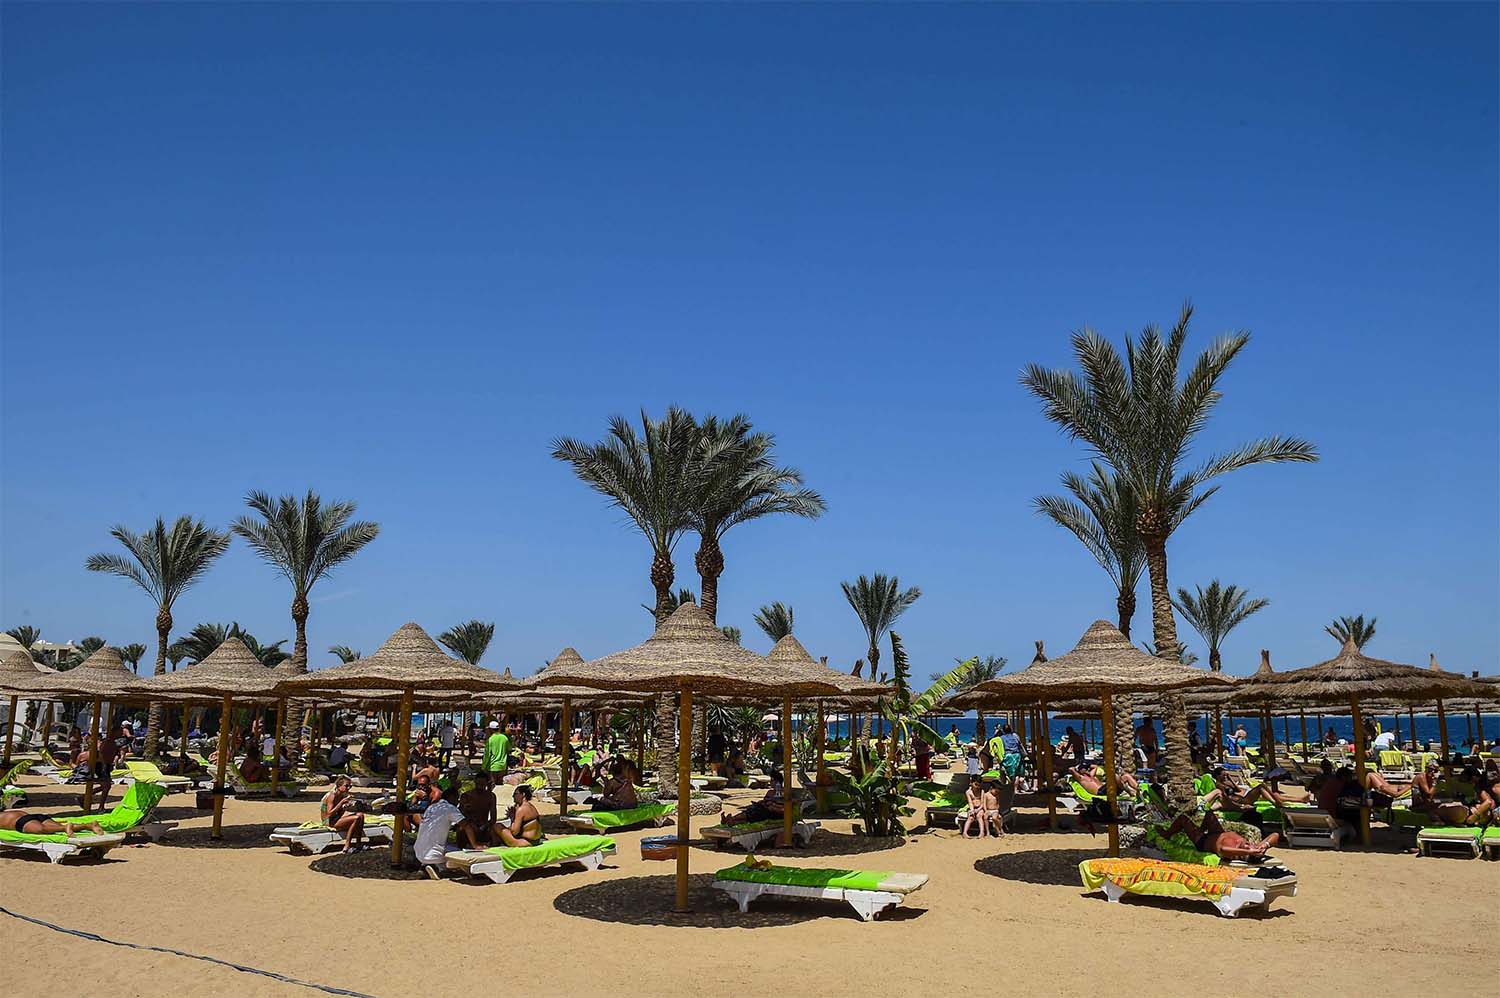 Tourists sunbathe on a beach in Egypt's Red Sea resort town of Hurghada on APril 2019